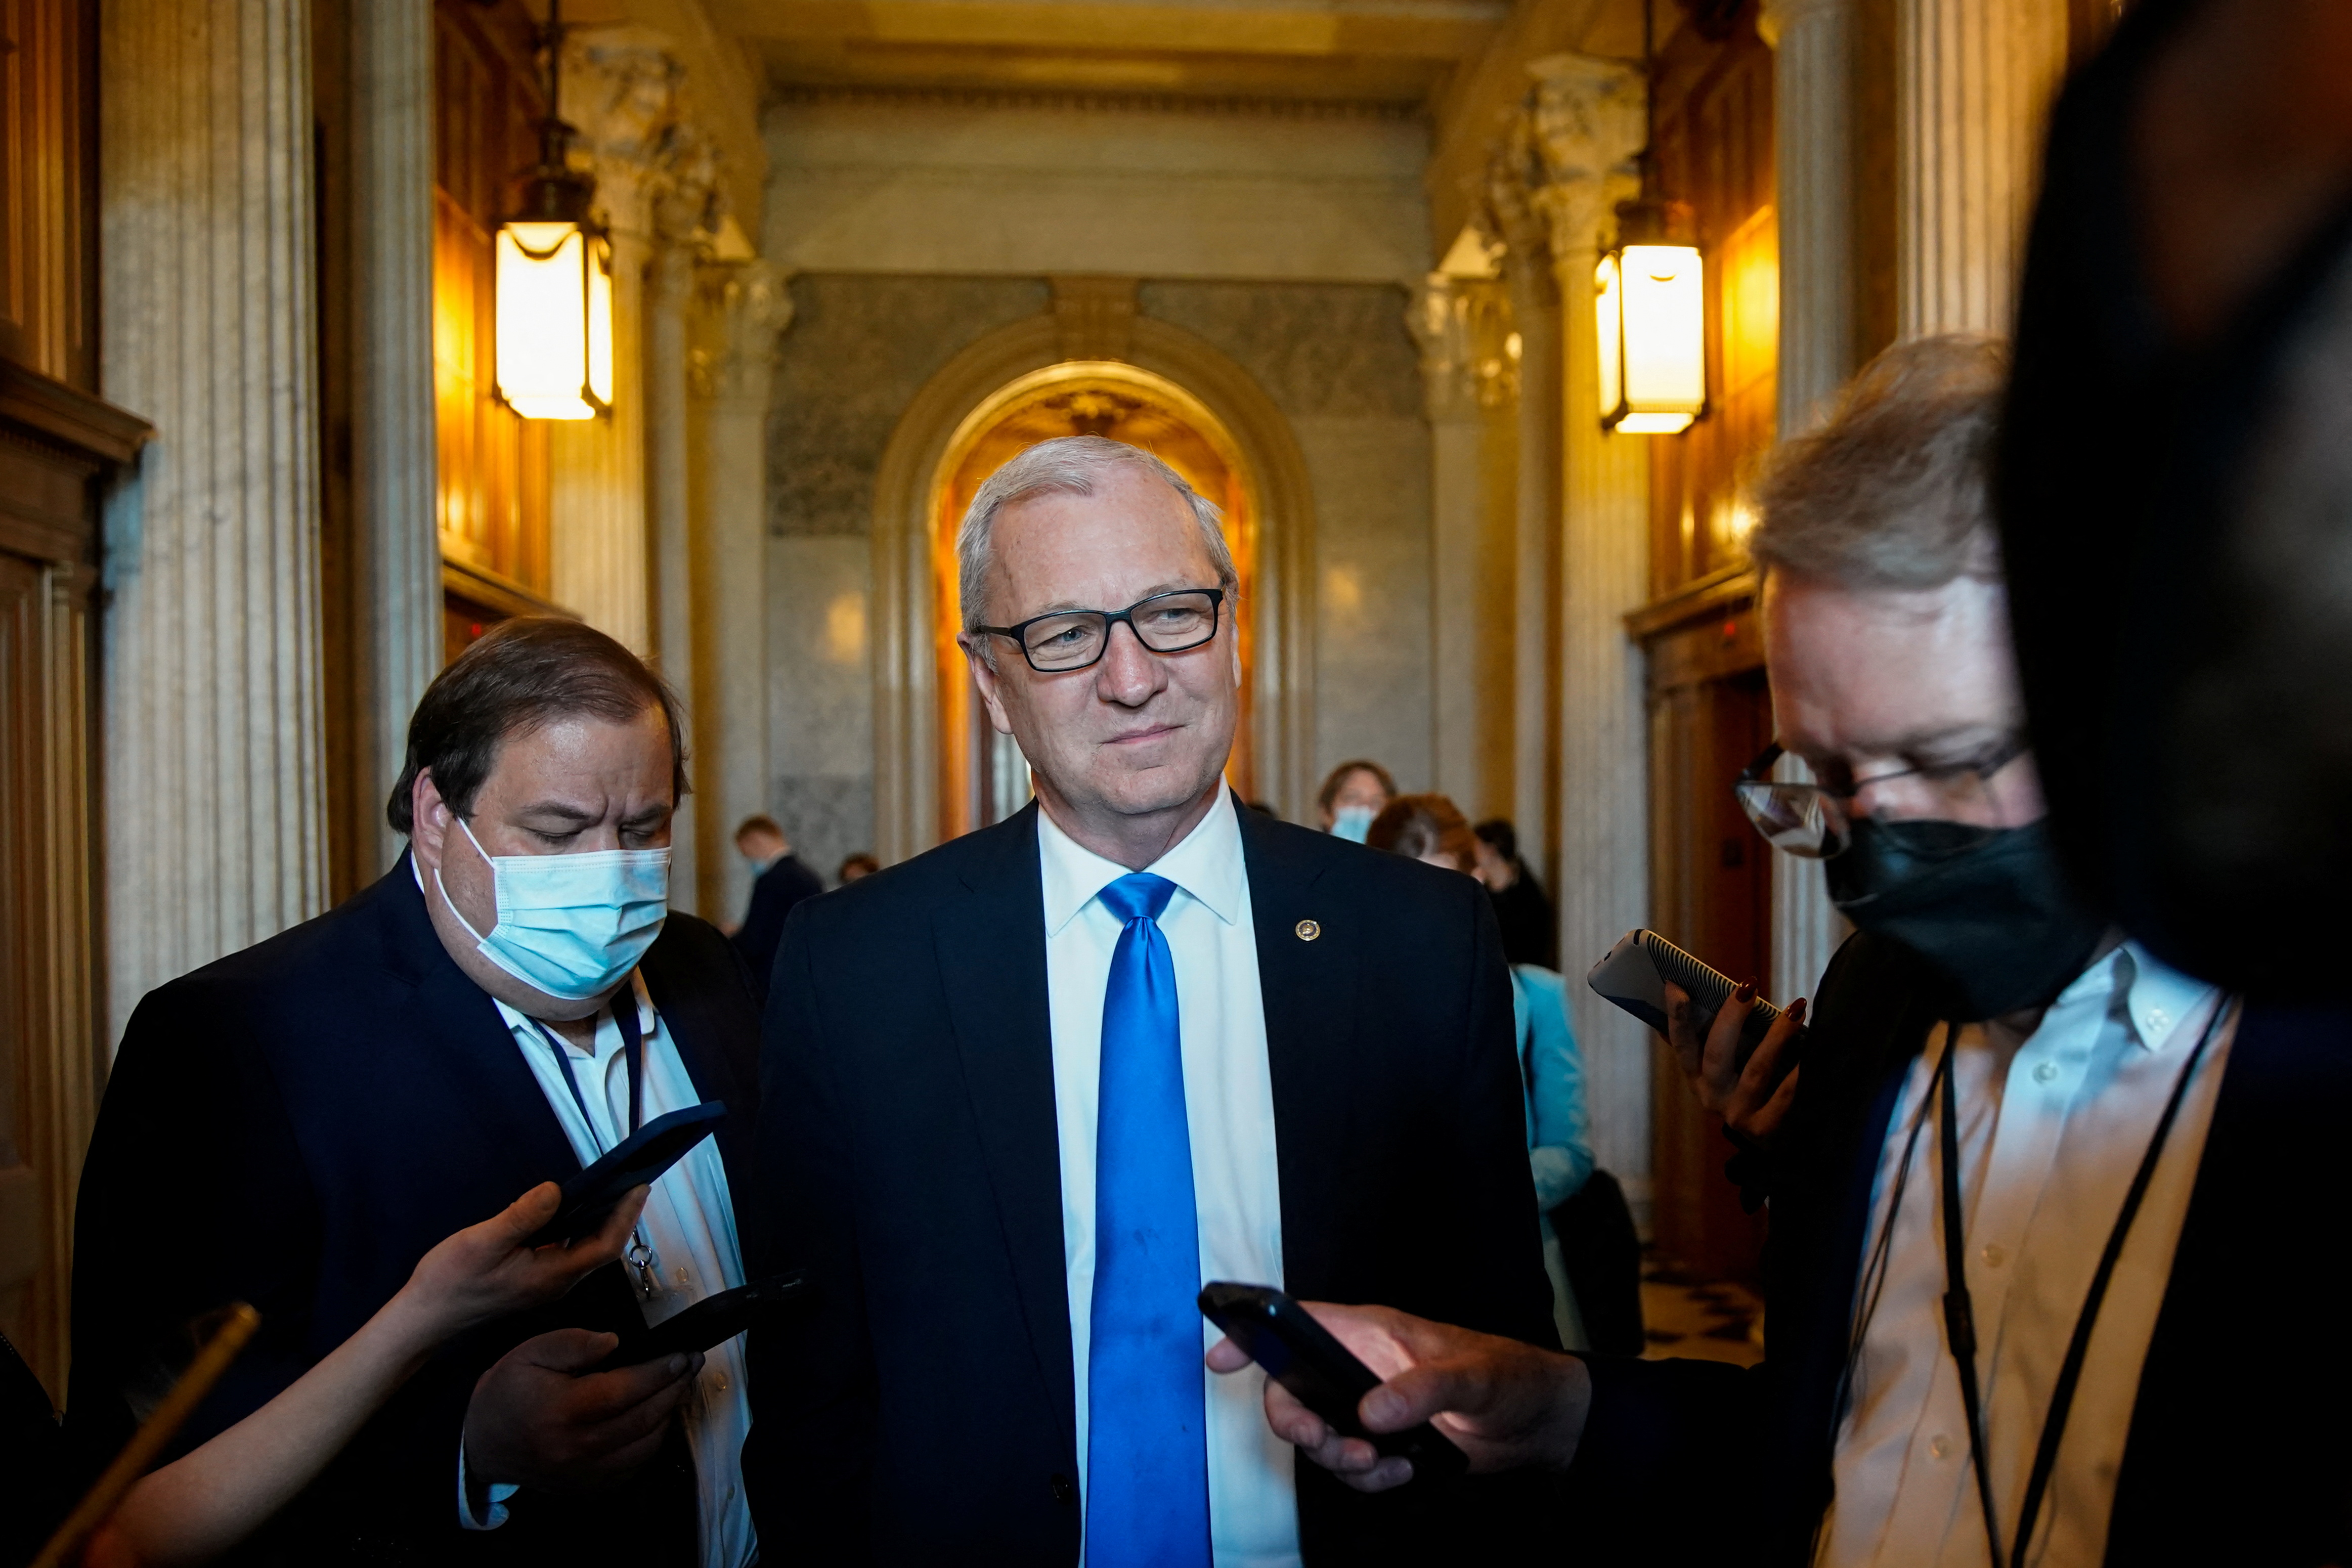 U.S. Senator Kevin Cramer (R-ND) talks to reporters after a meeting at the U.S. Capitol in Washington